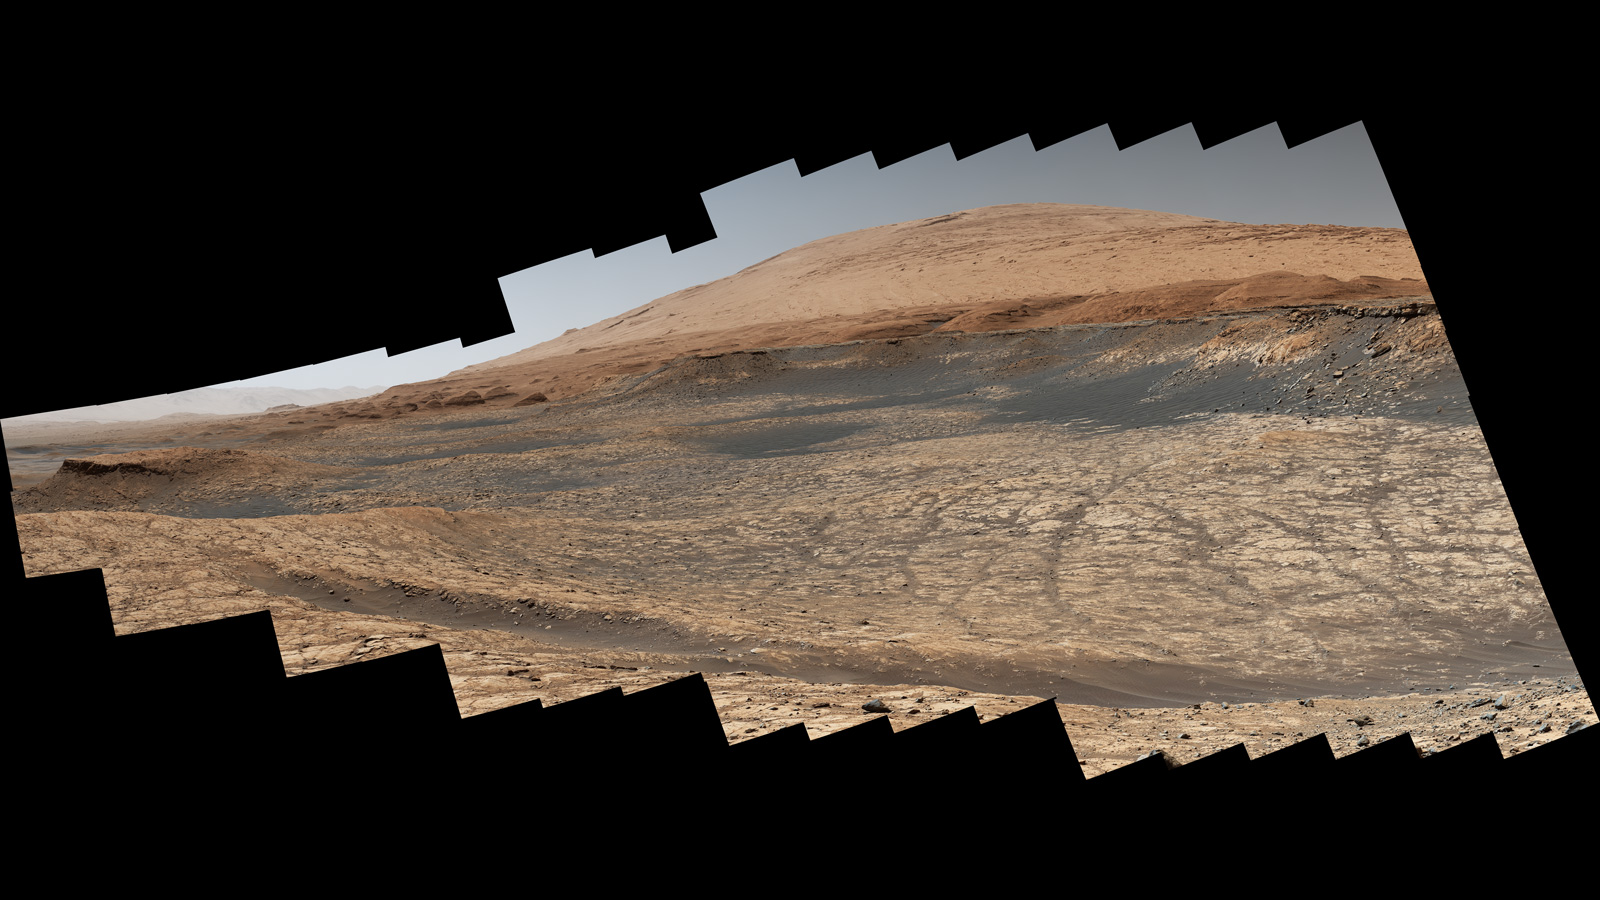 This view captured by NASA's Curiosity Mars rover shows the path it will take in the summer of 2020 as it drives toward the next region it will be investigating, the "sulfate-bearing unit."